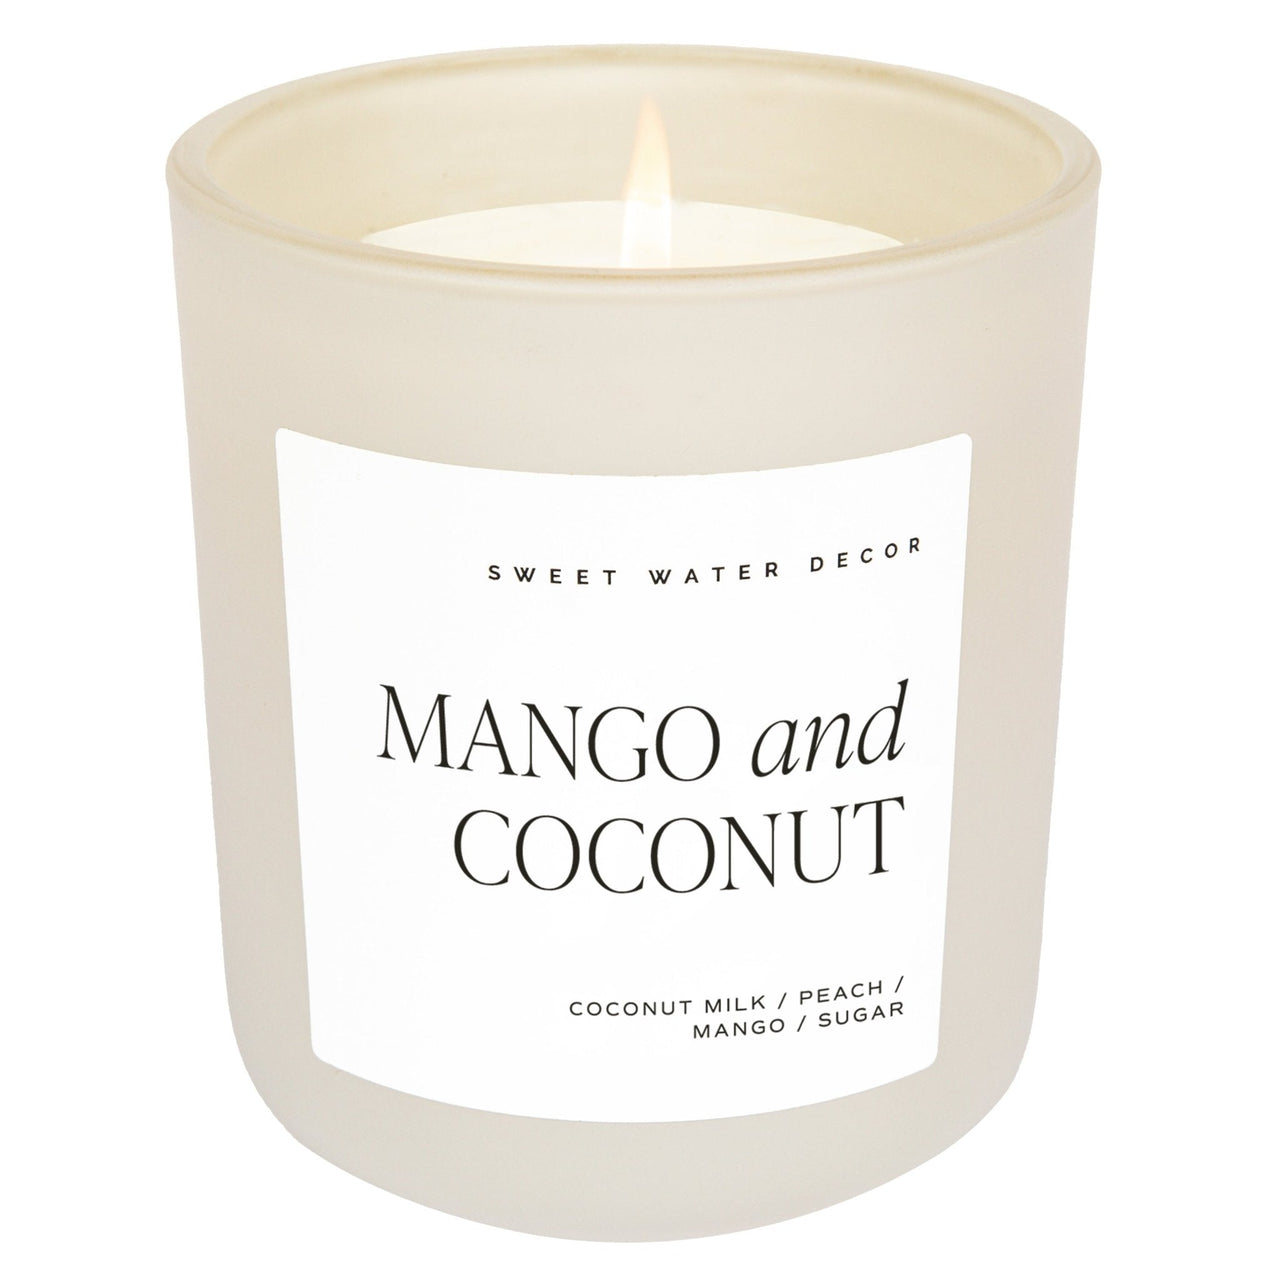 Mango and Coconut Soy Candle - Tan Matte Jar - 15 oz - Tony's Home Furnishings